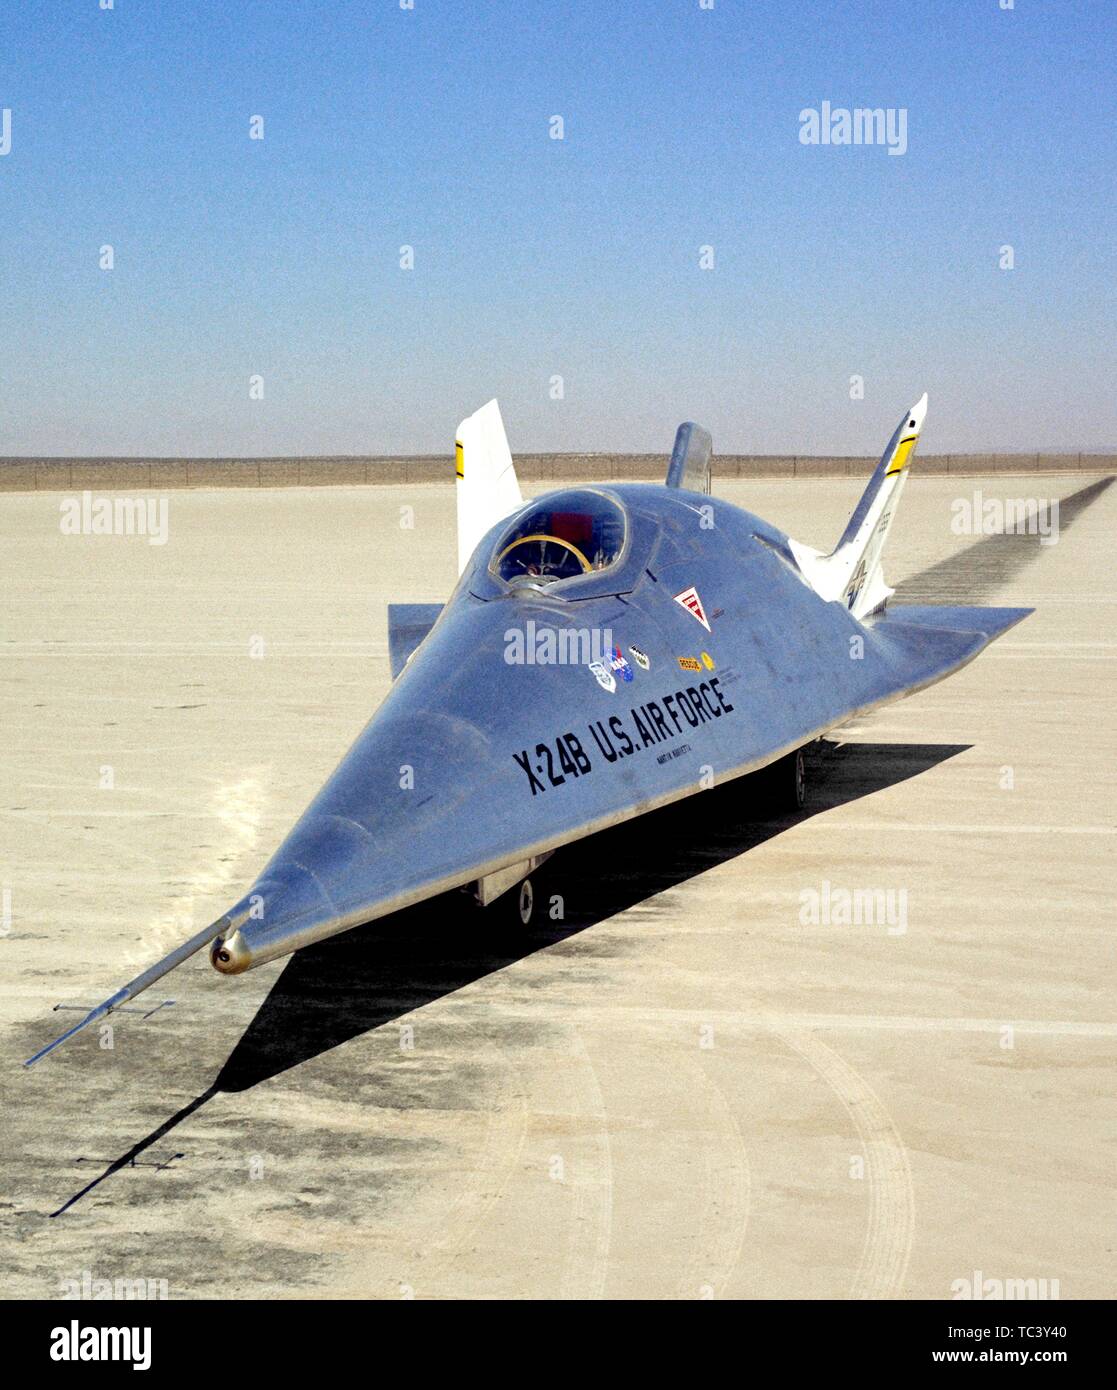 United States Air Force X-24B aircraft on the lakebed at the NASA Dryden Flight Research Center, Edwards, California, 1972. Image courtesy National Aeronautics and Space Administration (NASA). () Stock Photo